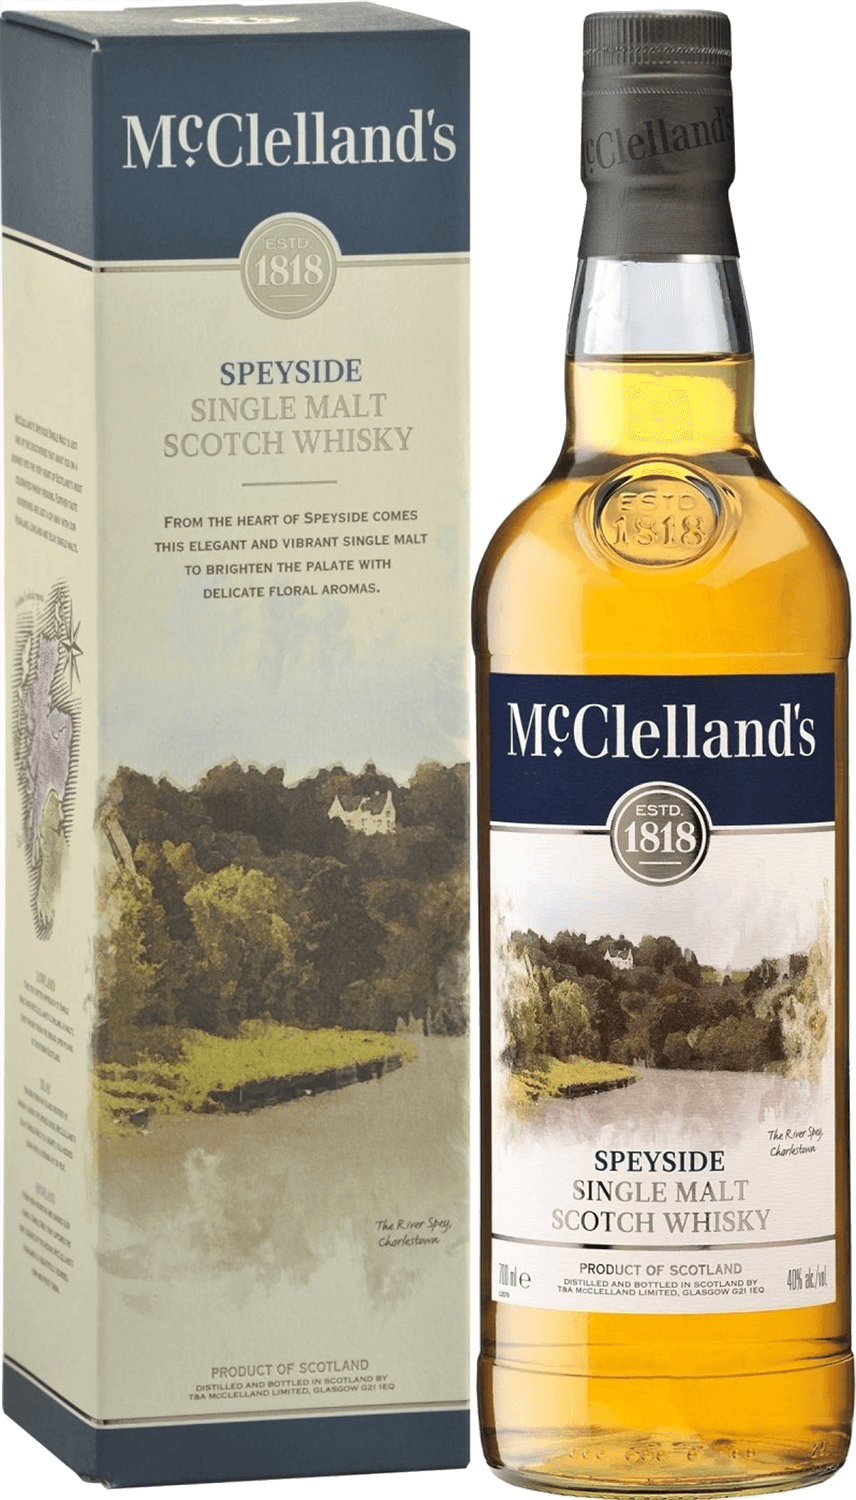 McClelland's Speyside single malt scotch whisky (gift box) aultmore 12 years old speyside single malt scotch whisky gift box